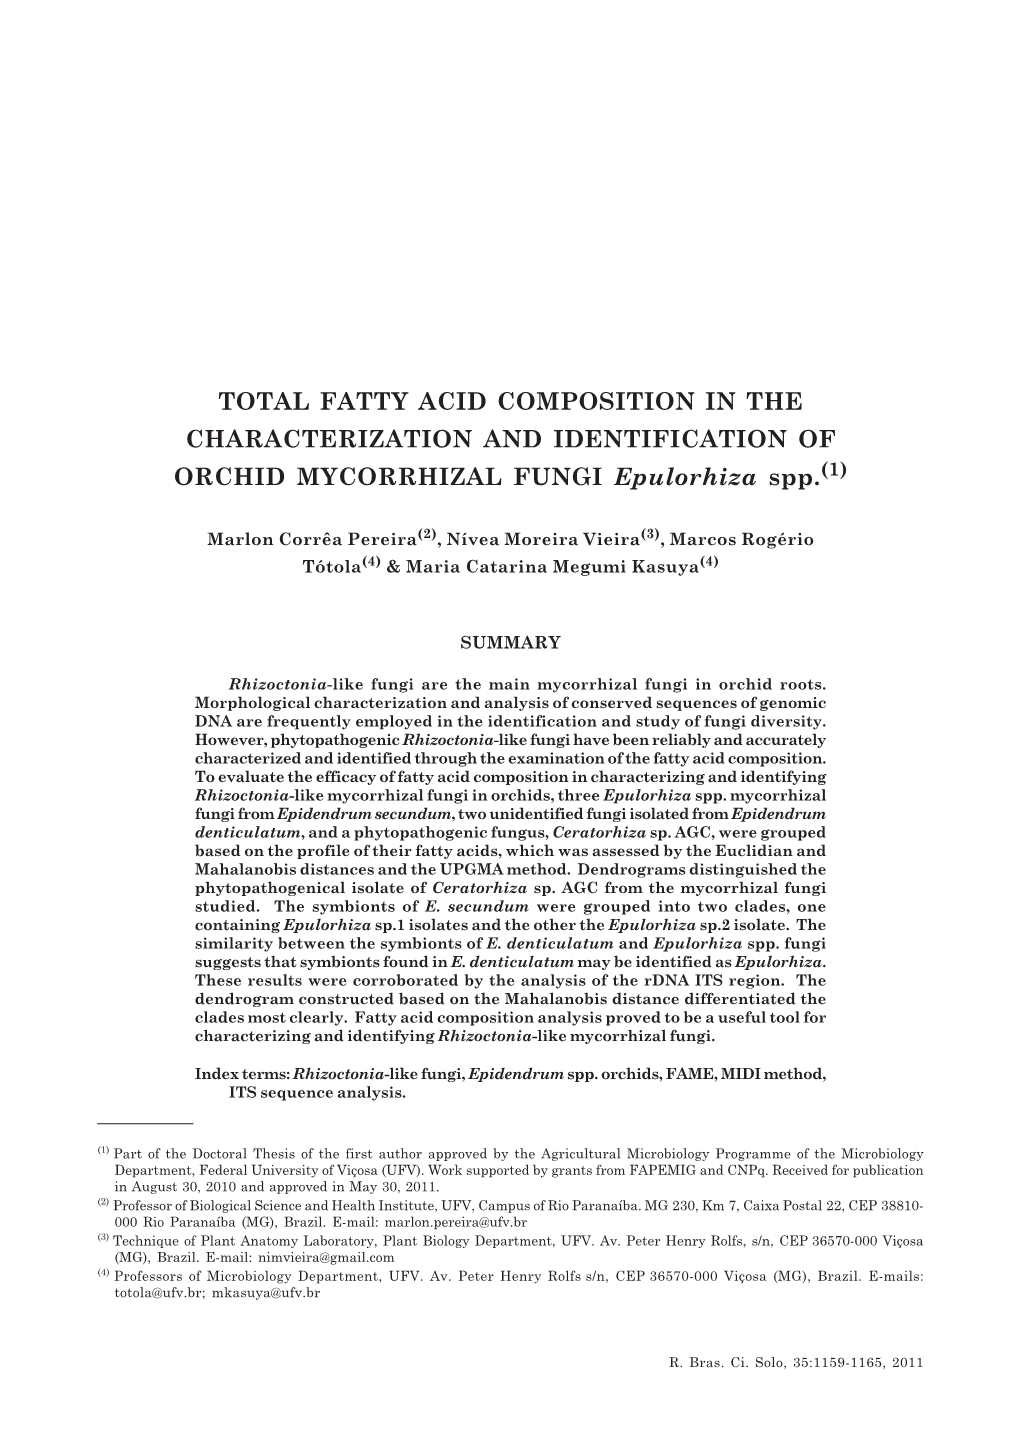 Total Fatty Acid Composition in the Characterization and Identification